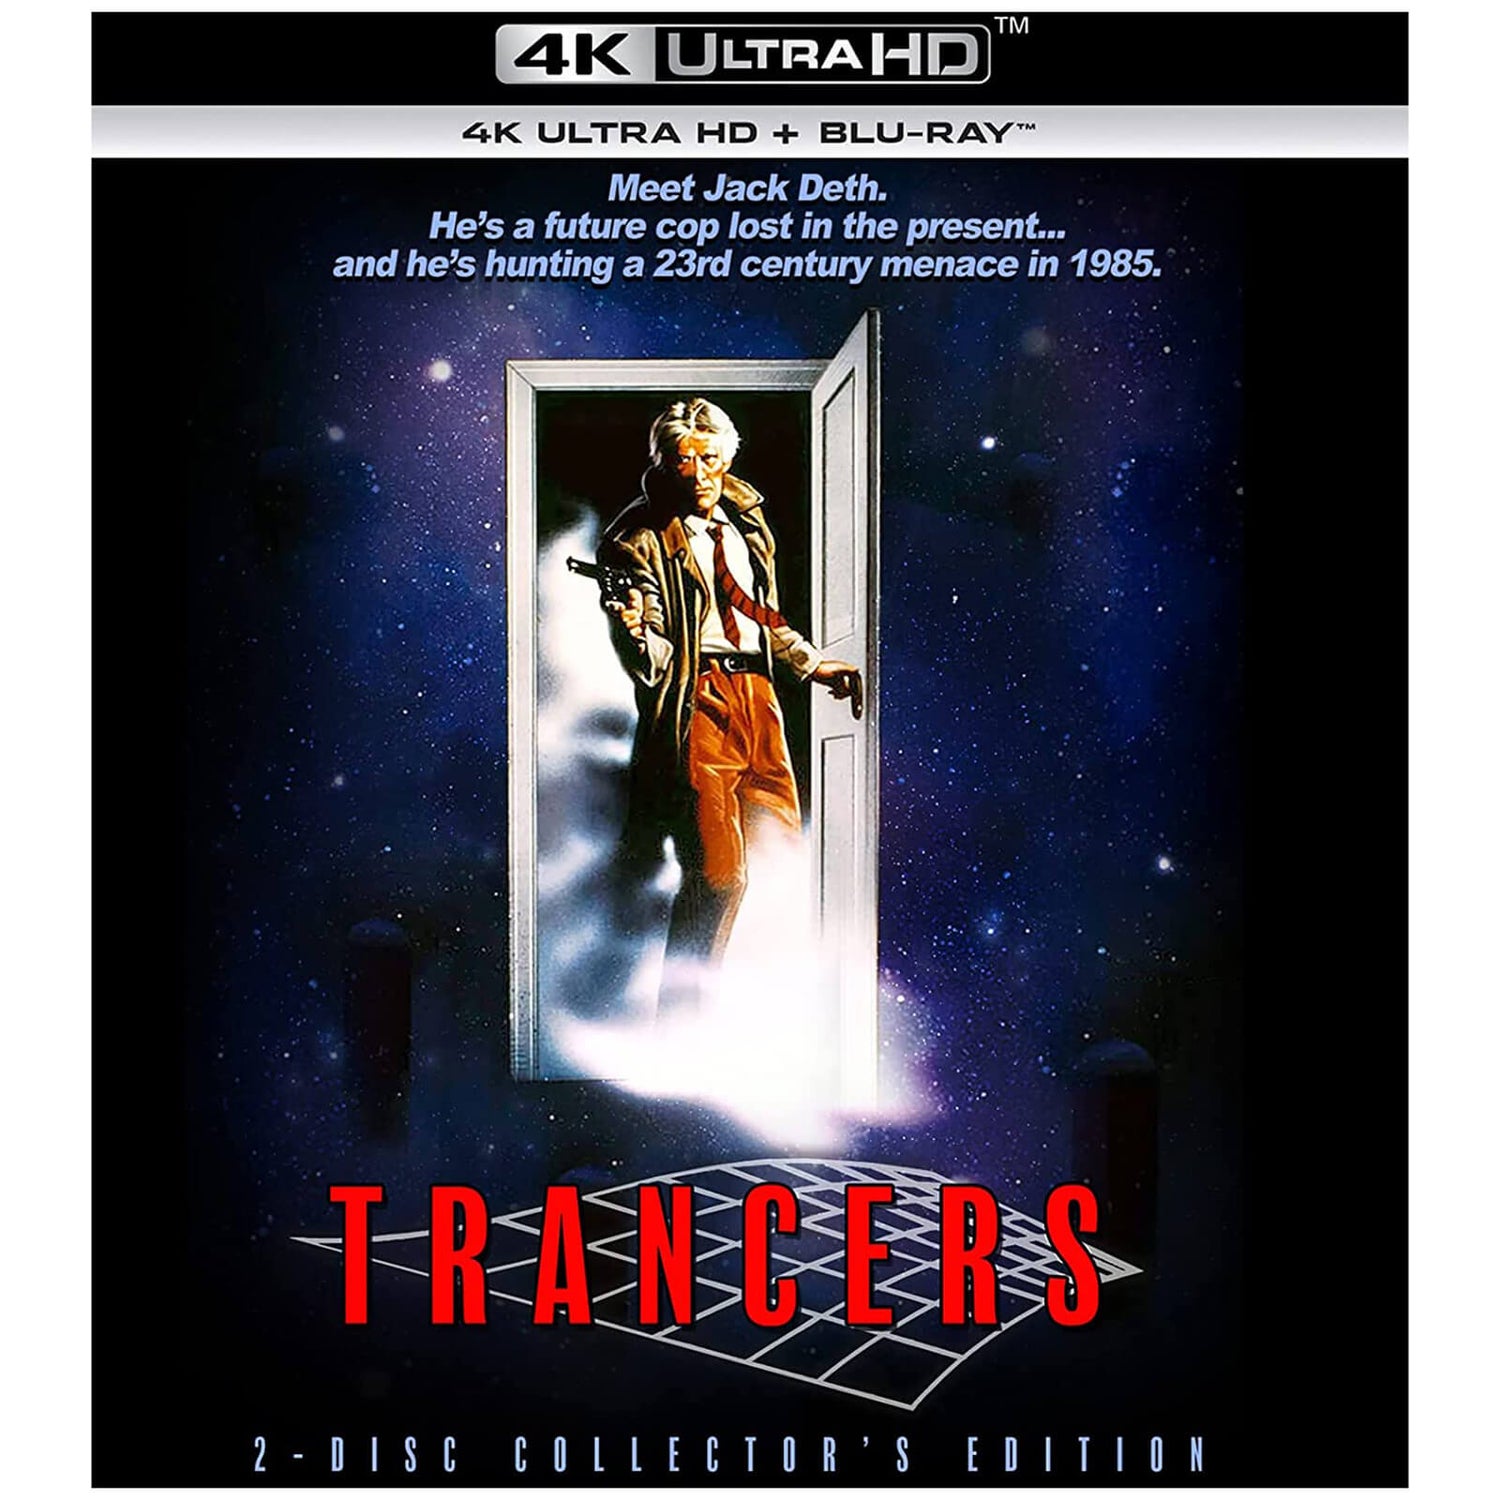 Trancers 4K Ultra HD 2-Disc Collector's Edition (Includes Blu-ray)